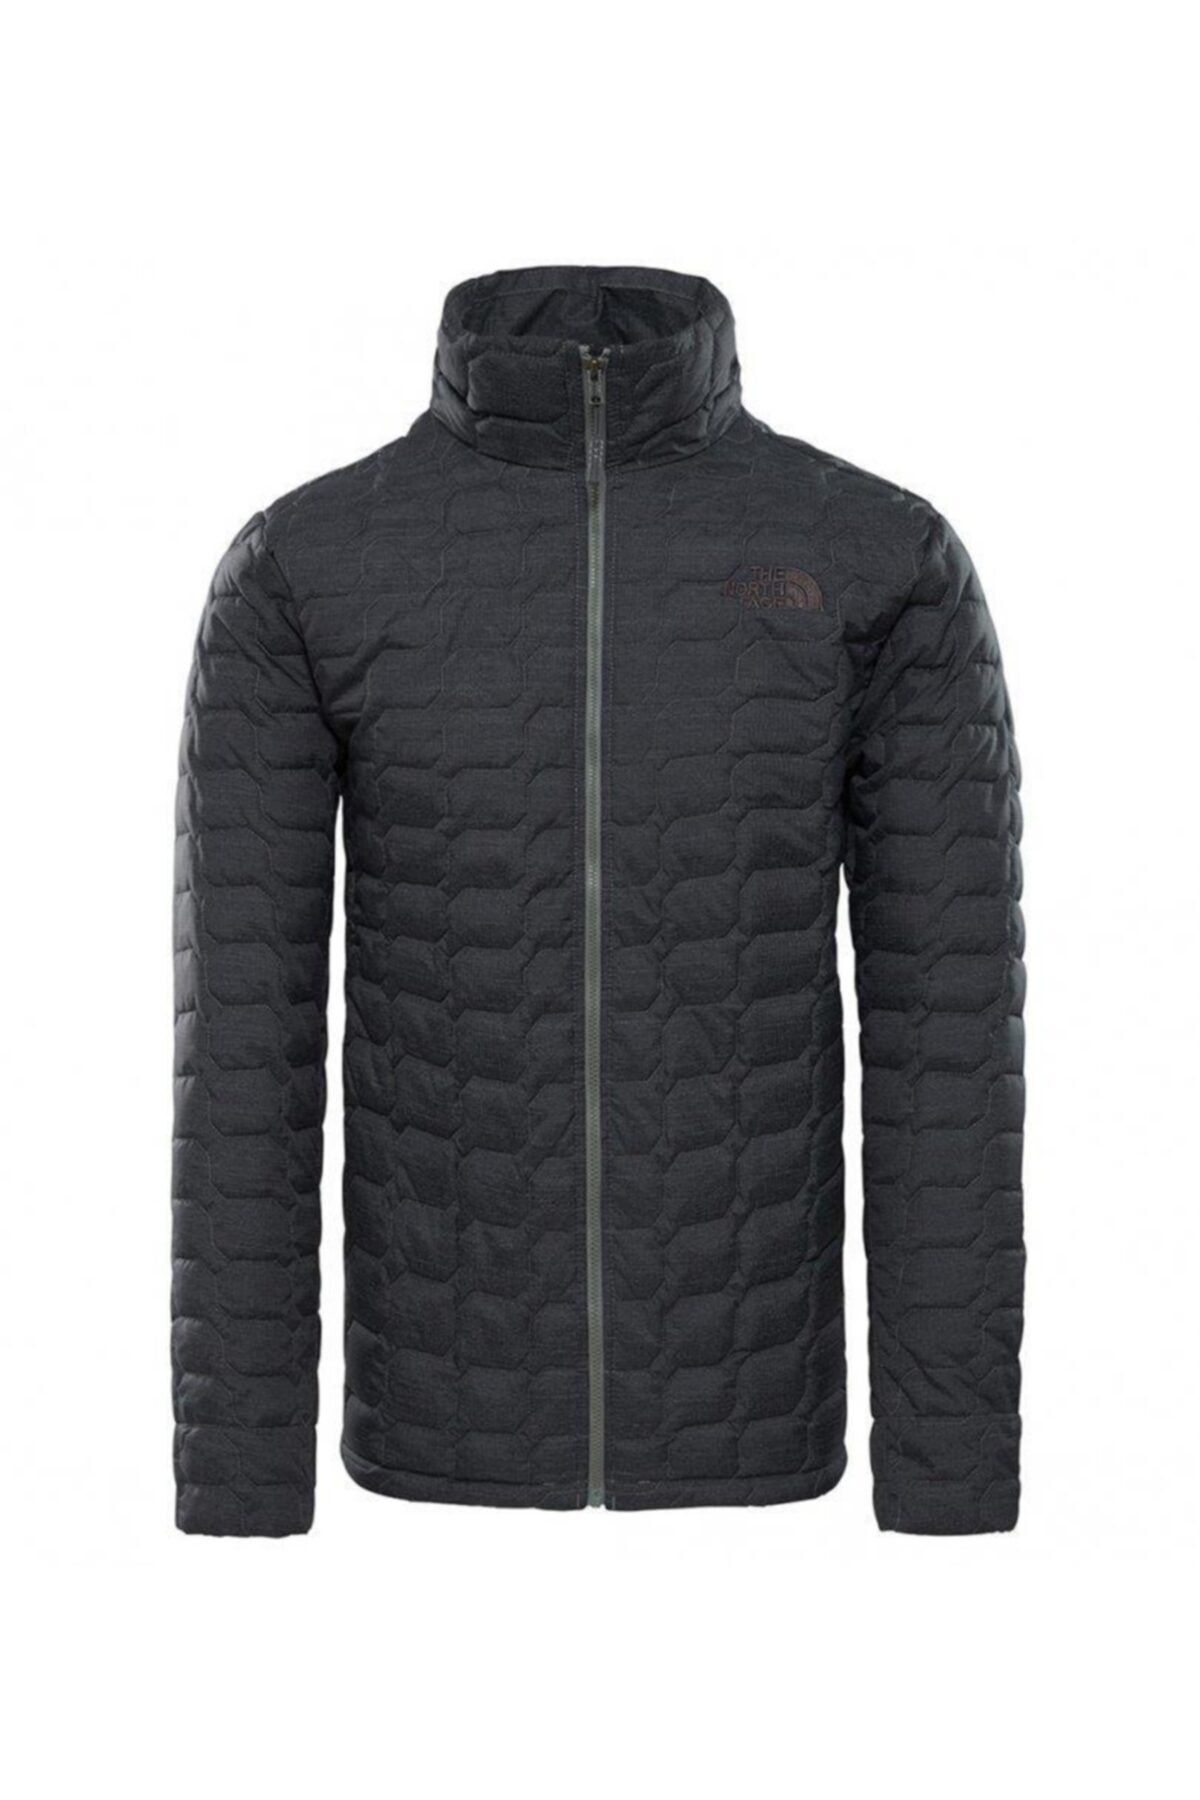 The North Face Thermoball Erkek Ceket - T93rxaq2t